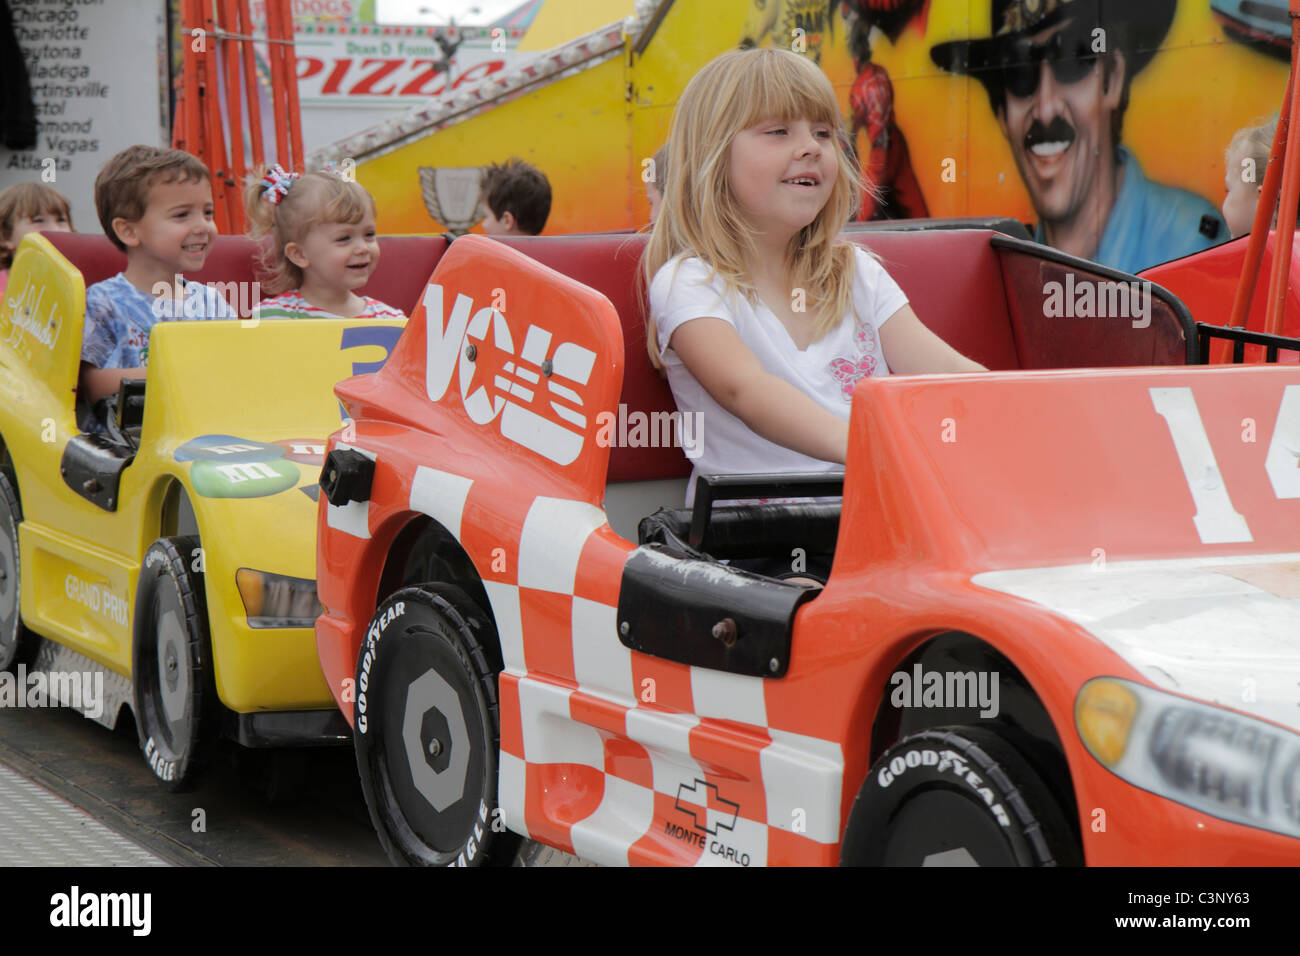 Plant City Florida,Florida Strawberry Festival,event,kiddy ride,carnival,girl girls,female kid kids child children youngster youngsters youth youths b Stock Photo